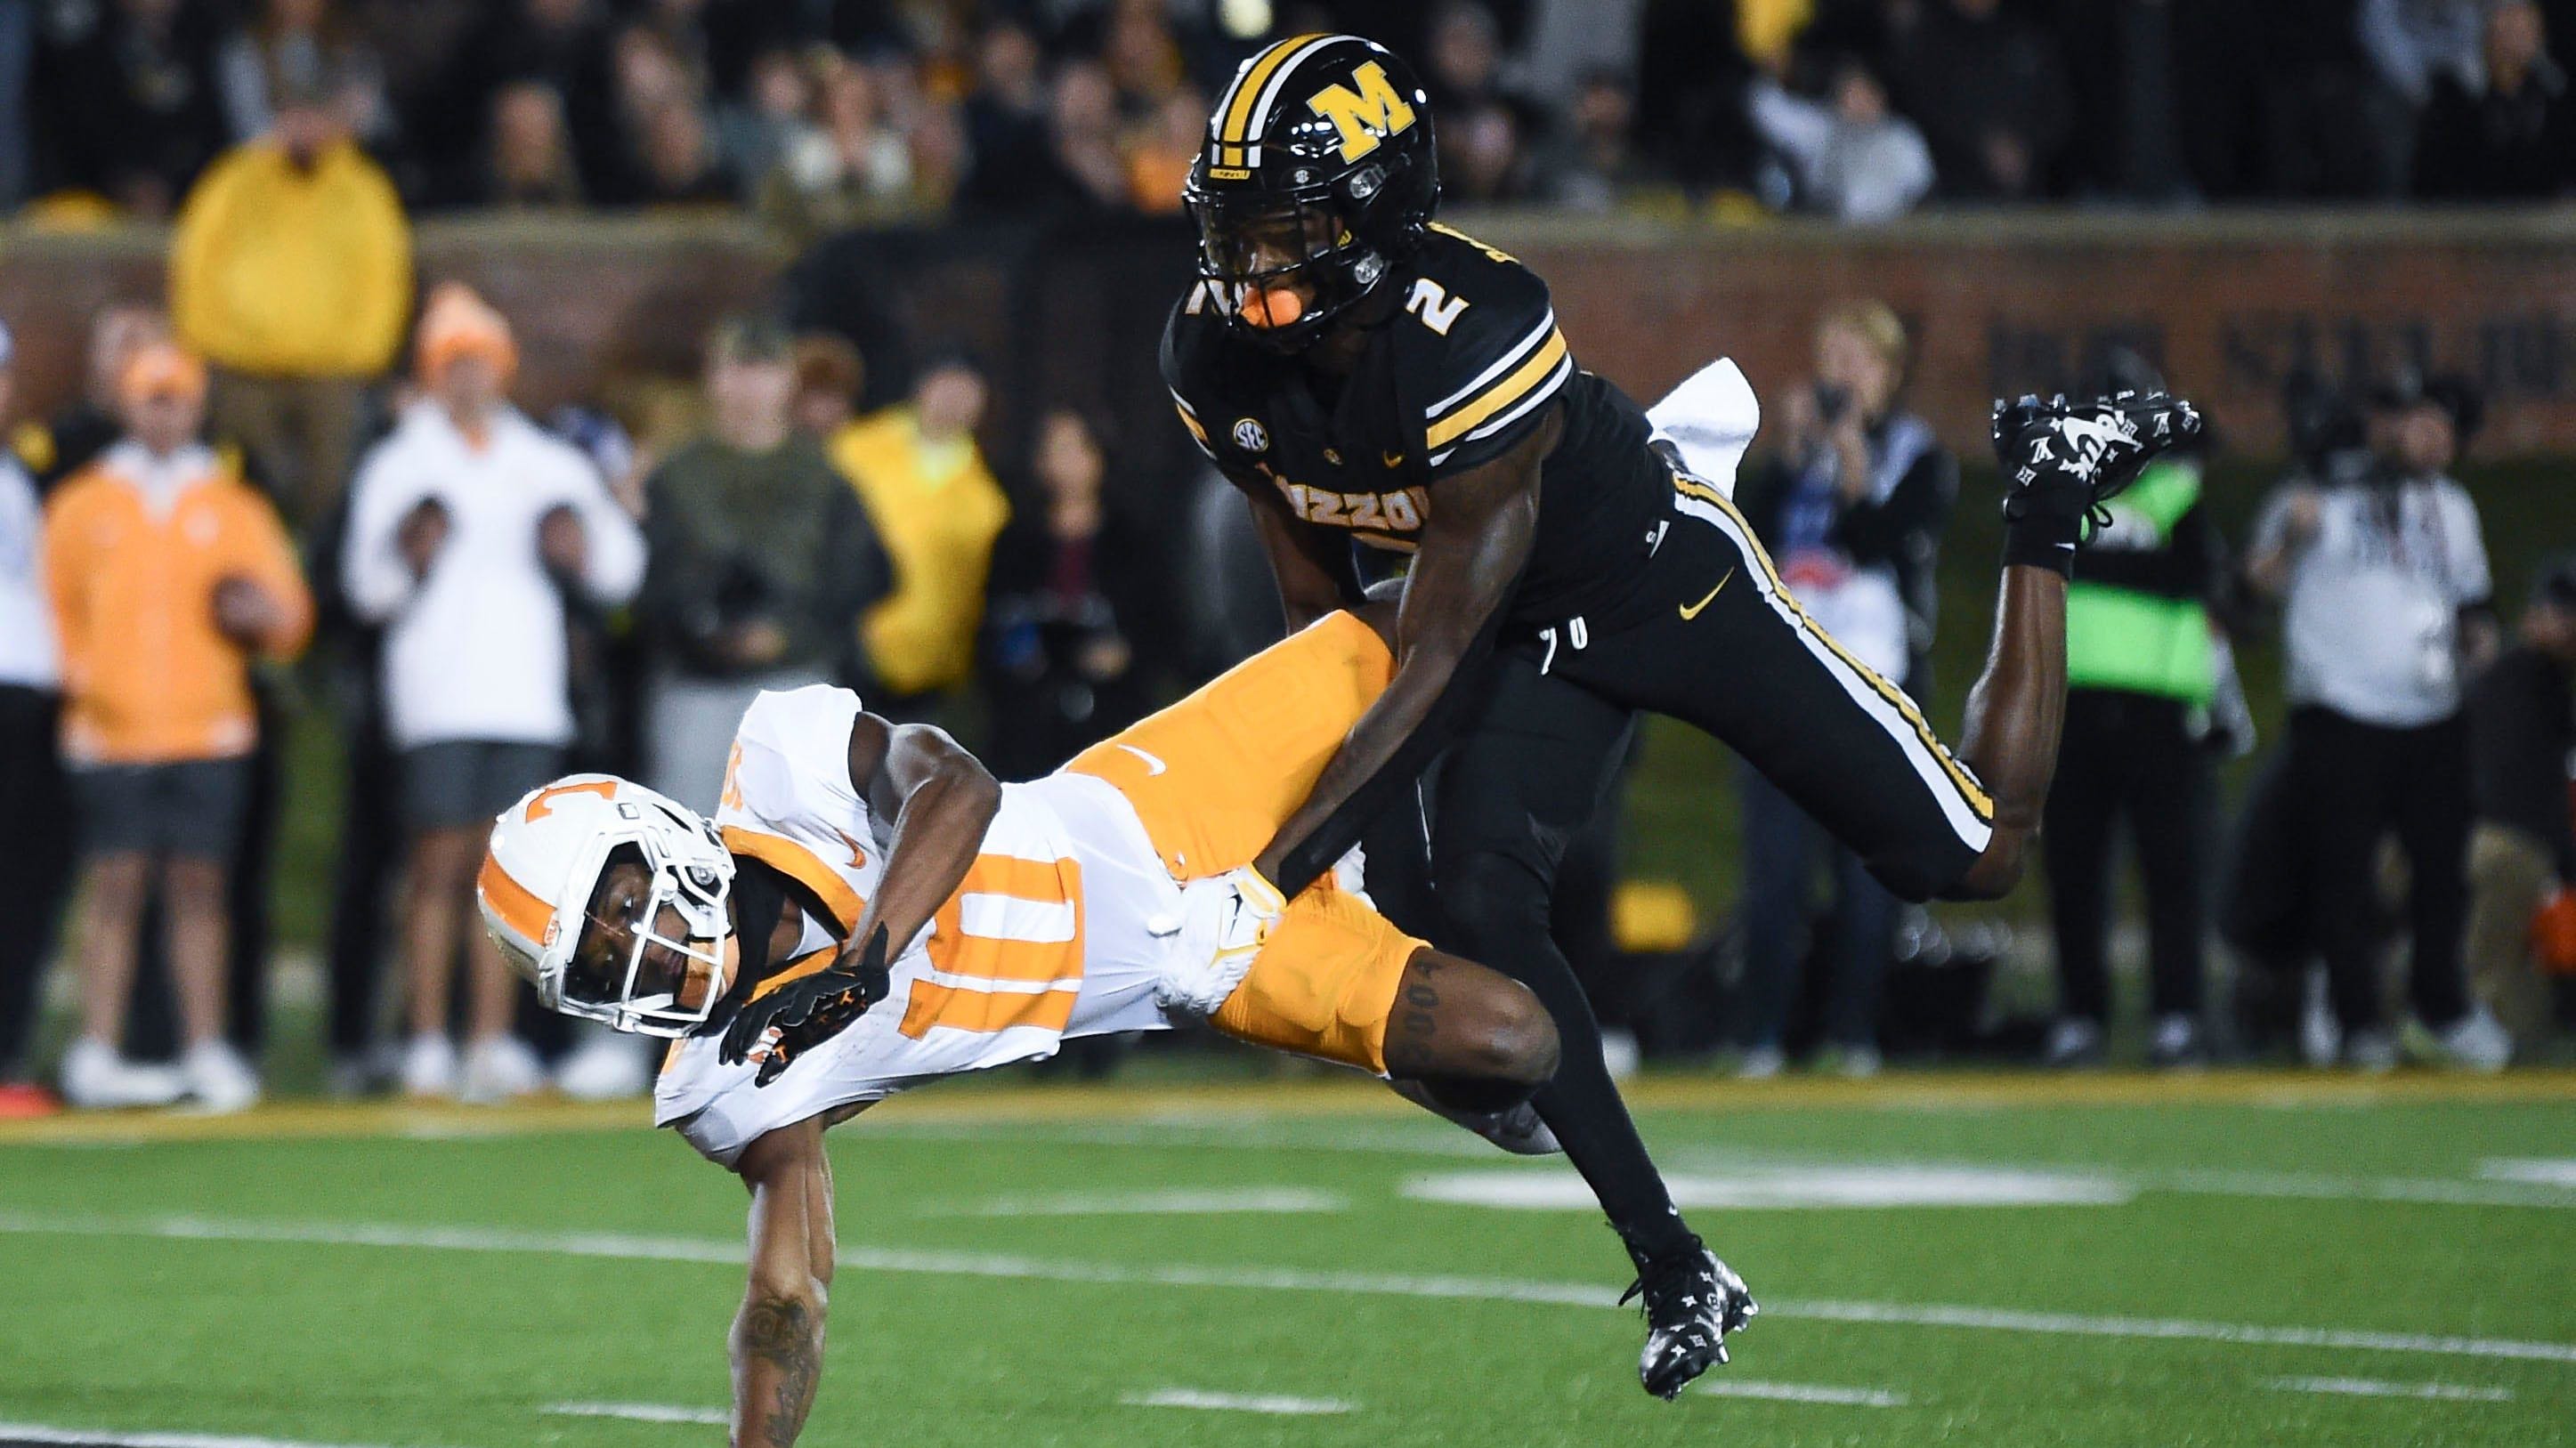 The ball is thrown past Tennessee wide receiver Squirrel White (10) while covered by Missouri cornerback Ennis Rakestraw (2).